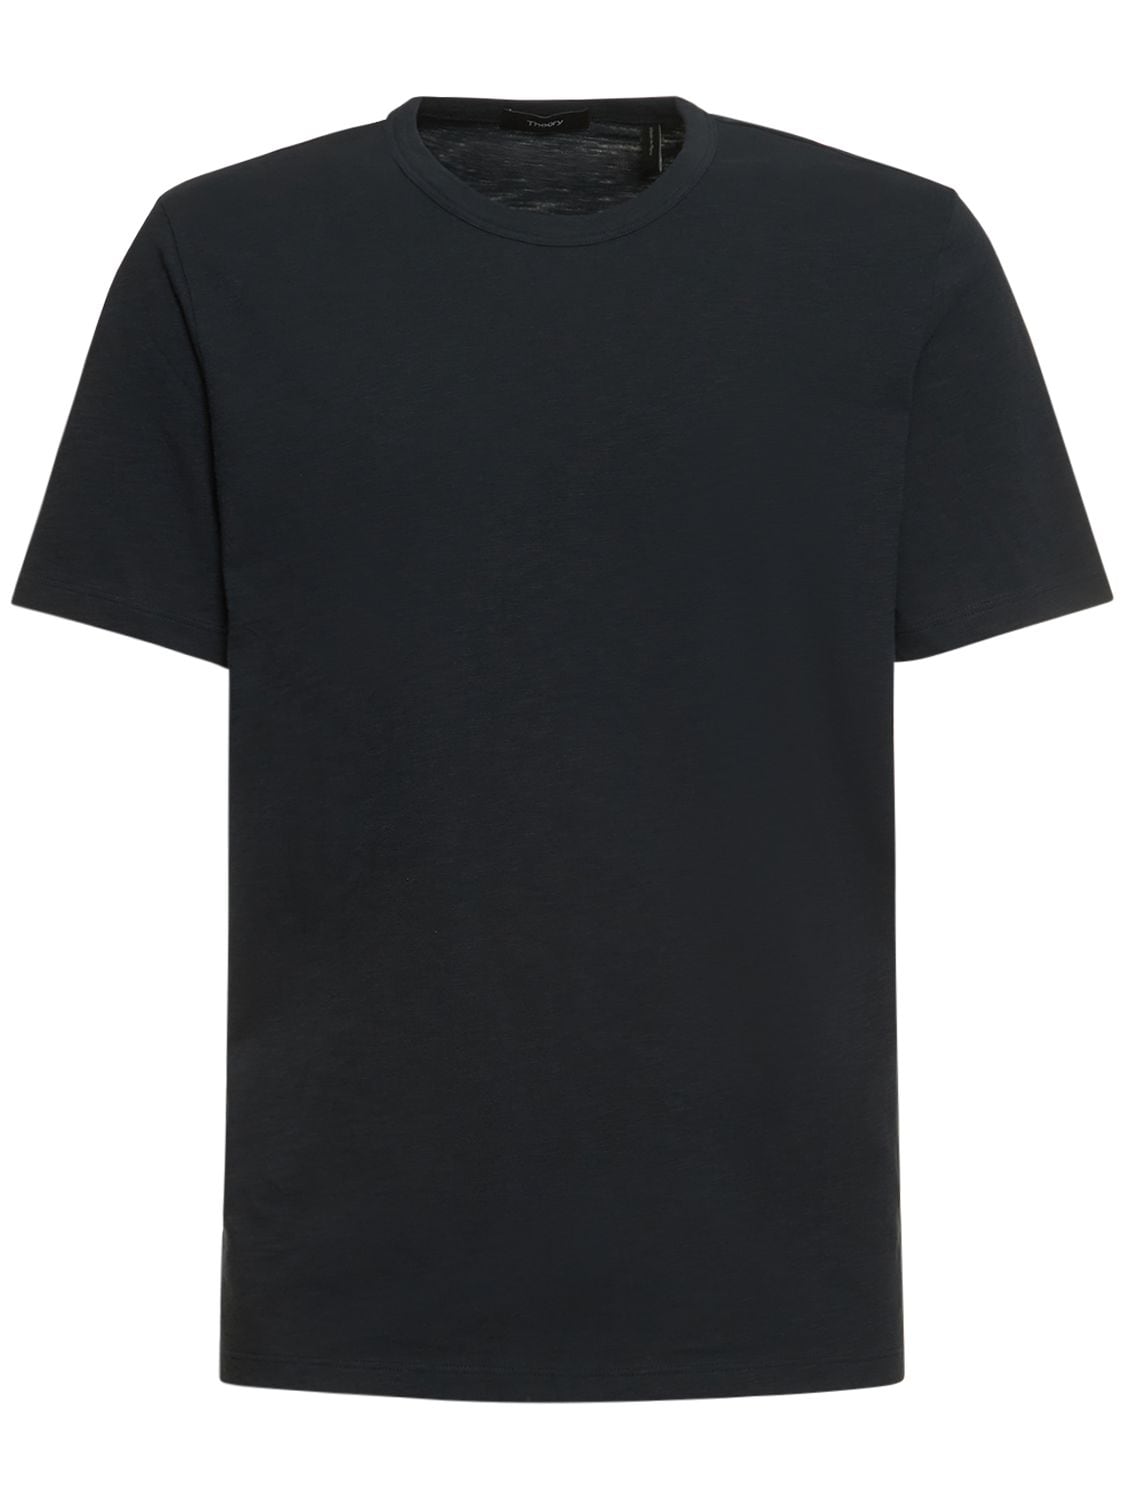 THEORY ESSENTIAL COSMO T-SHIRT